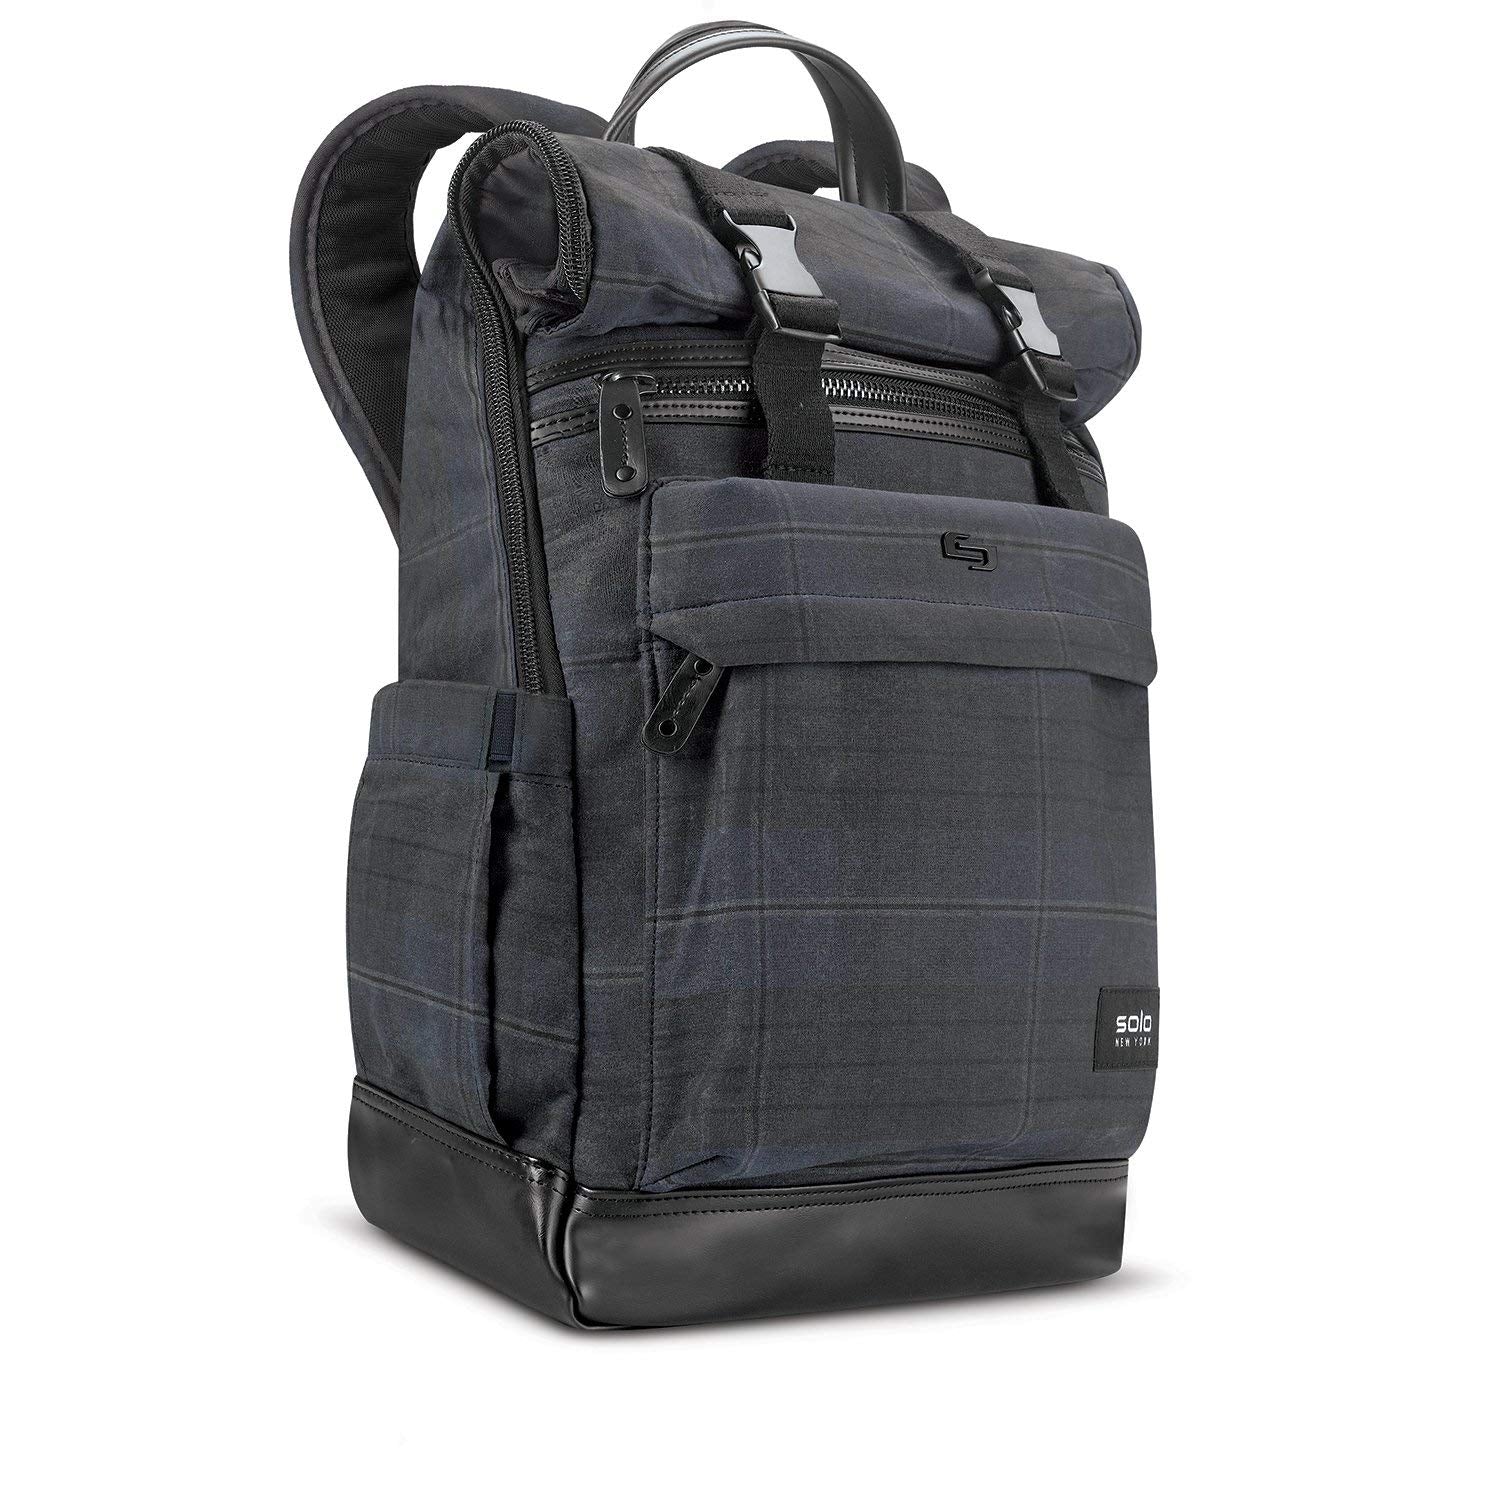 Solo Cameron Rolltop Waxed Canvas Highland Collection Laptop Backpack - Travel Trek Luggage ...